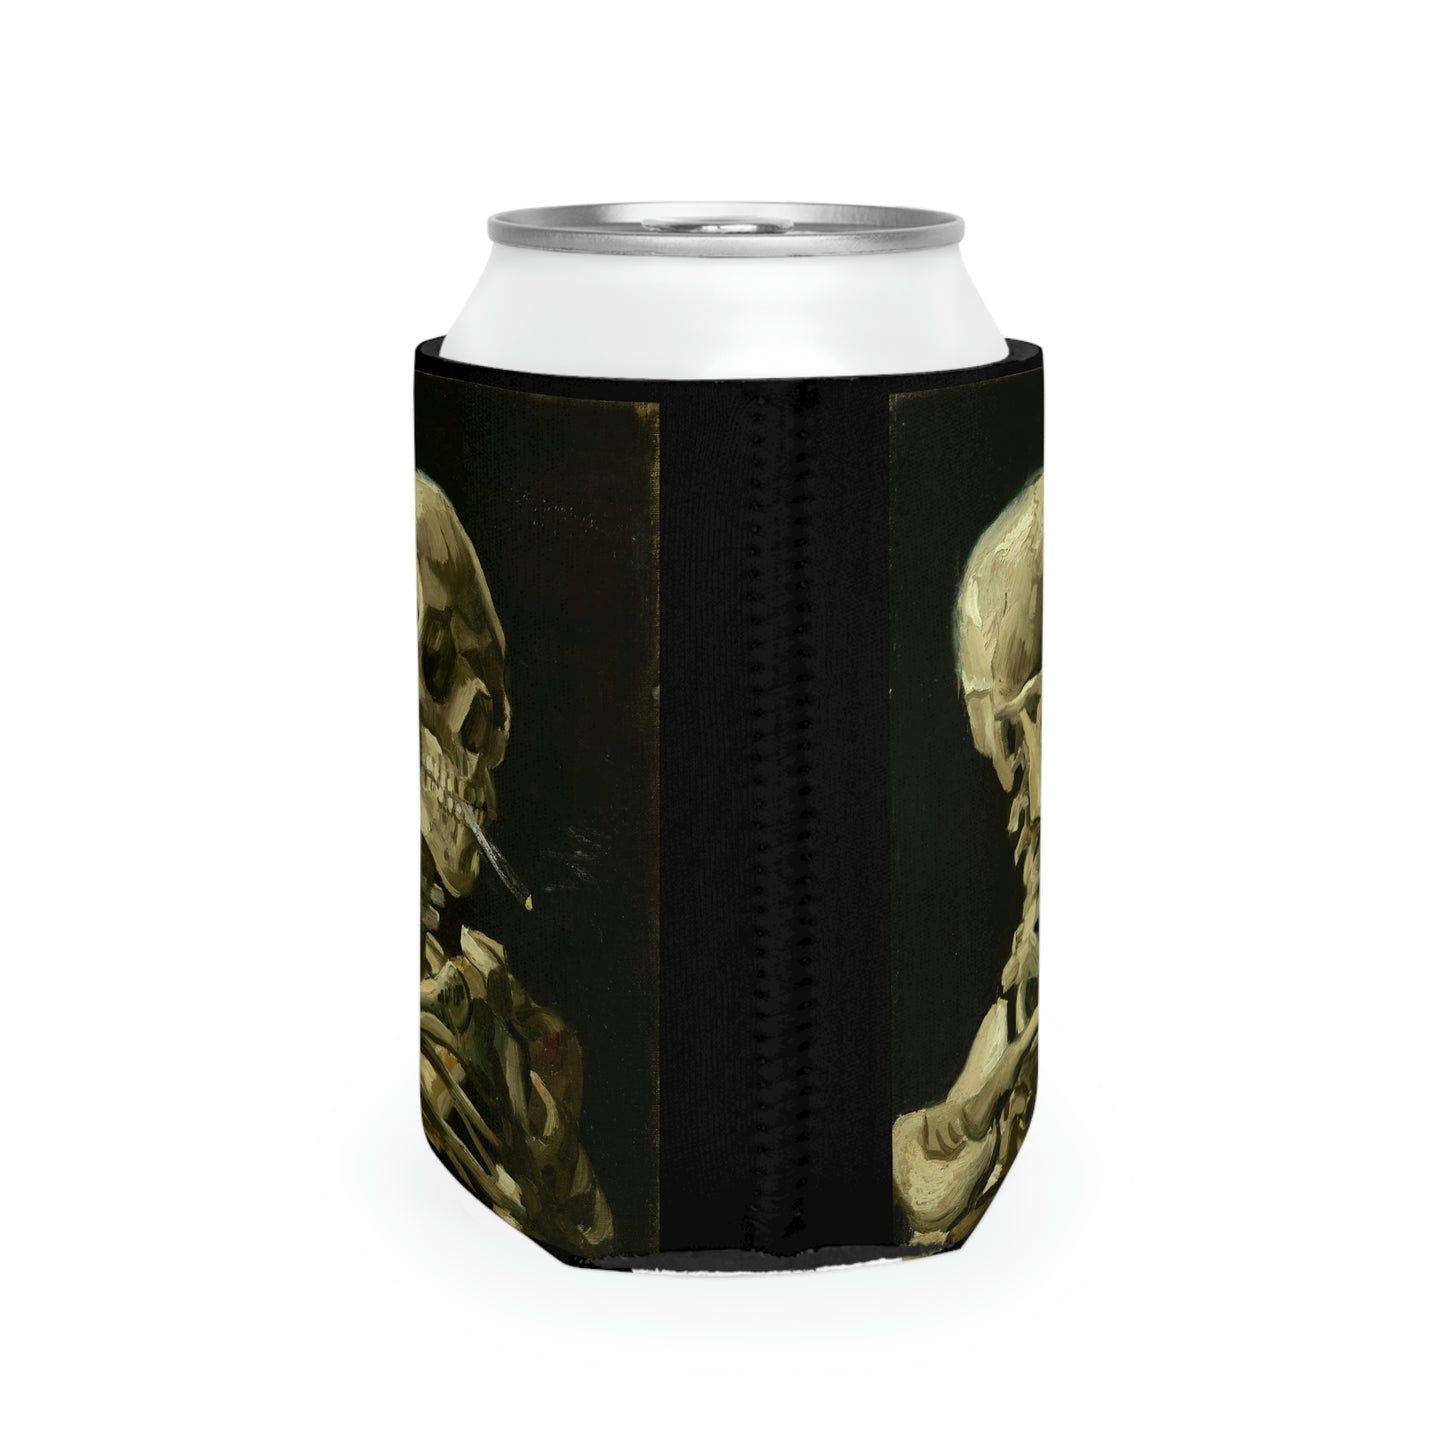 Skull of a Skeleton with a Burning Cigarette by Vincent Van Gogh - Can Cooler Sleeve